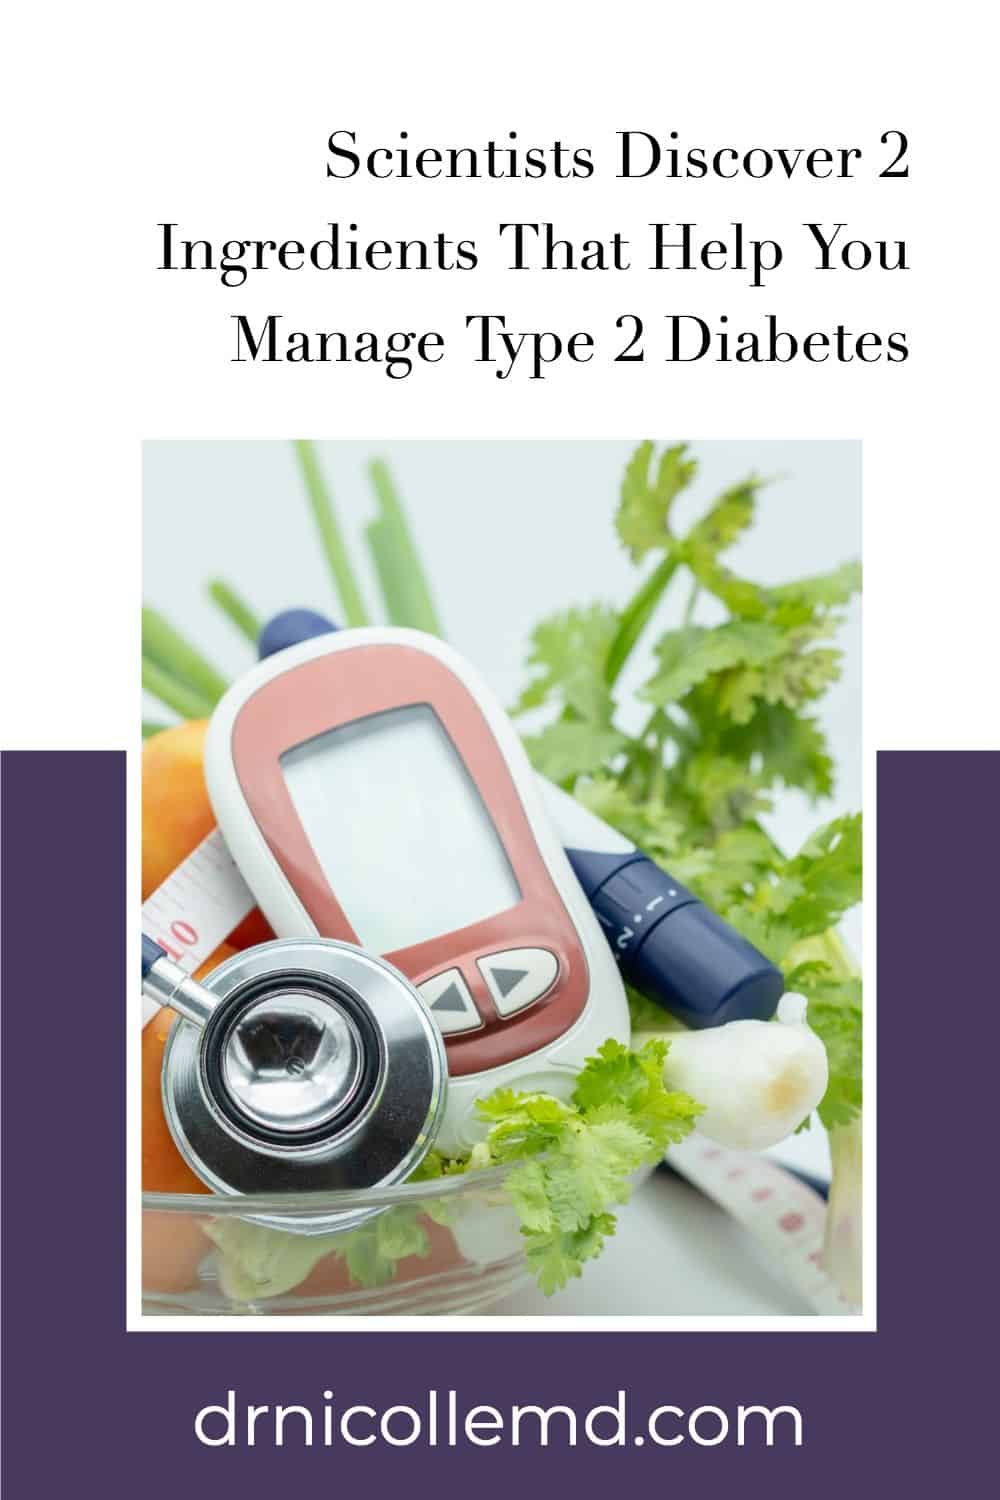 Scientists Discover 2 Ingredients That Help You Manage Type 2 Diabetes